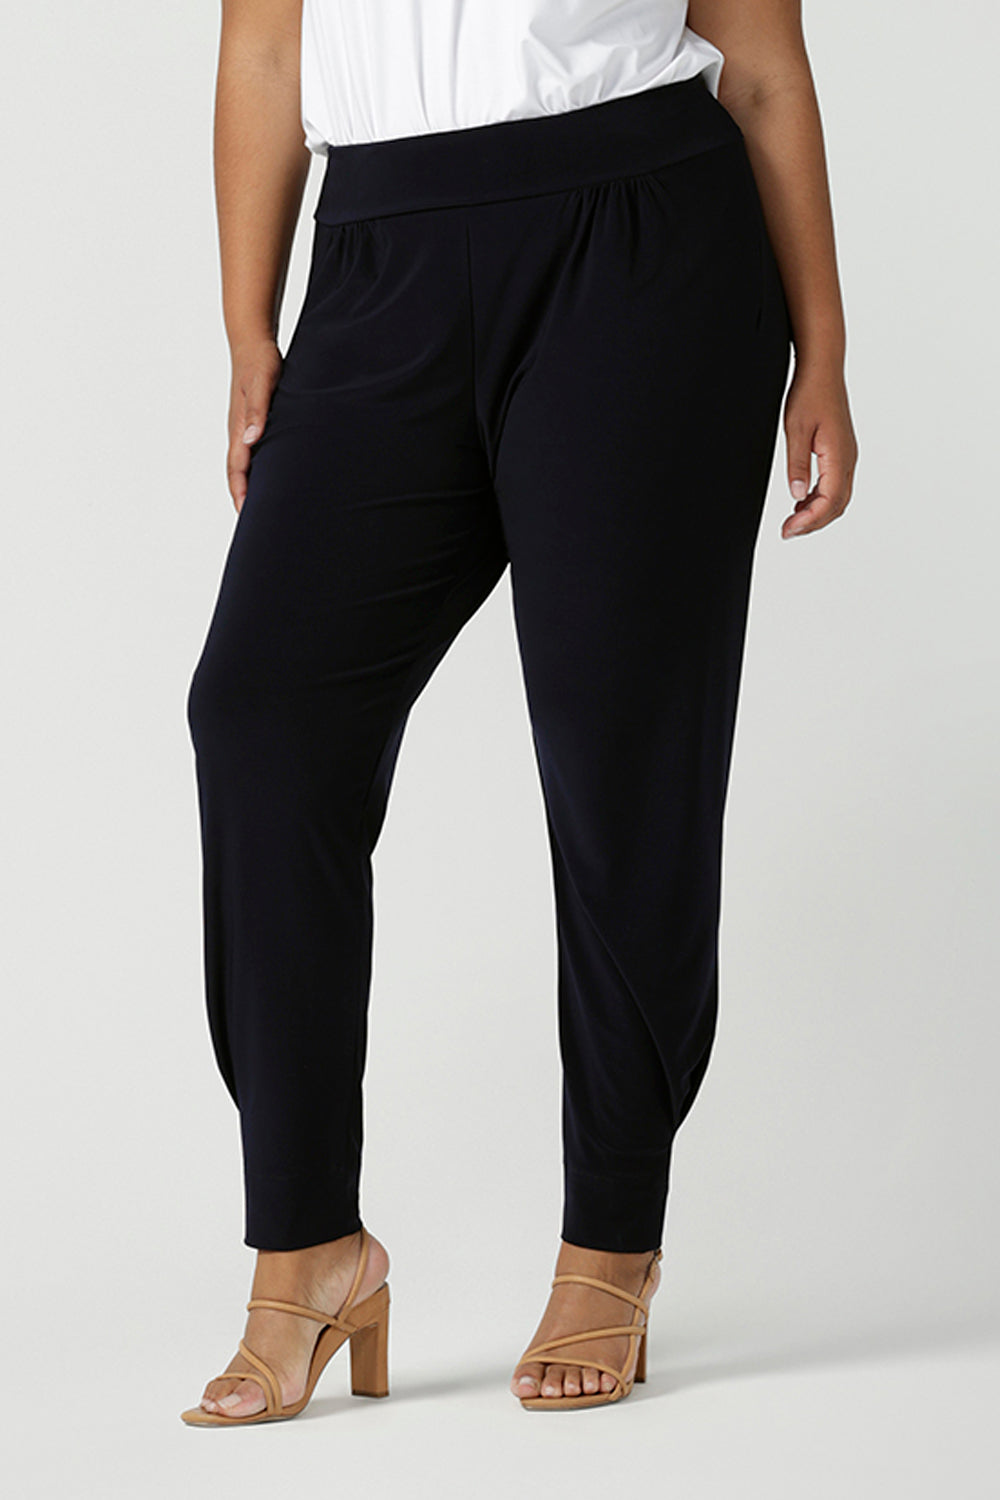 A size 18 curvy woman wears great pants for travel, these dropped crotch, single seam navy pants are made stretchy jersey for ultimate comfort. shop these comfy navy pants for your travel and capsule wardrobe now! Available in sizes 8-24.